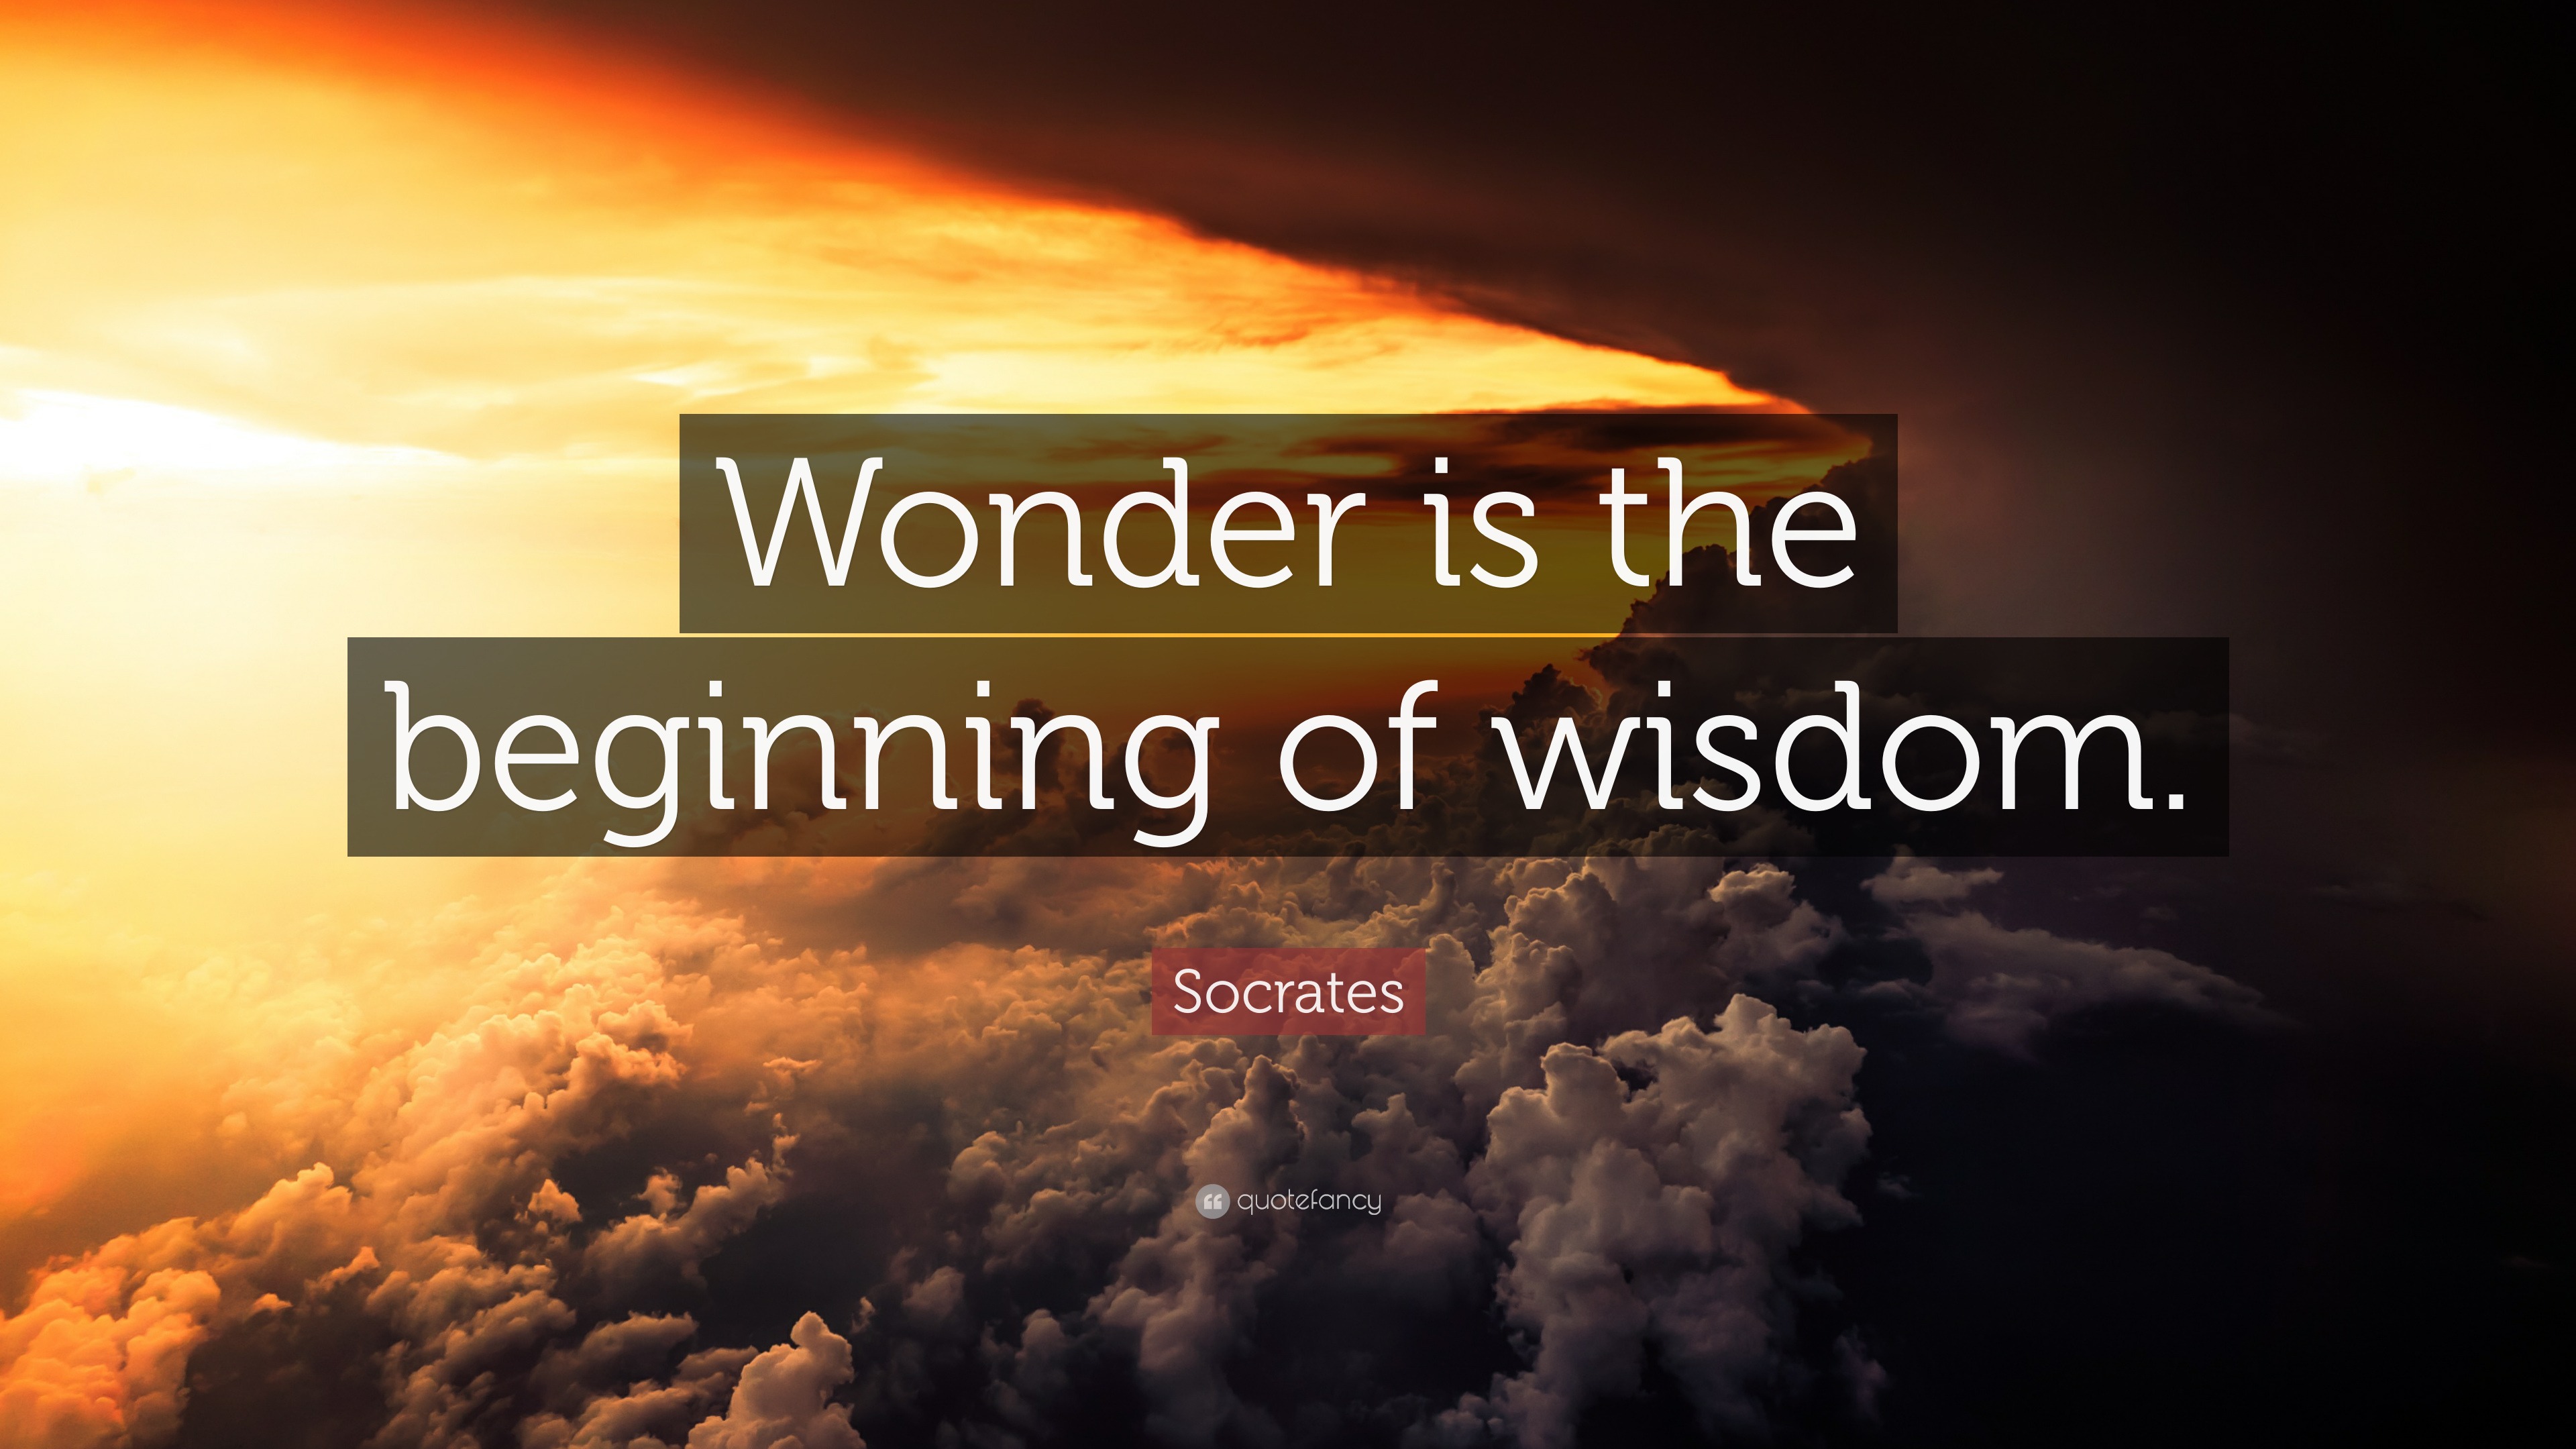 Socrates Quote: “Wonder is the beginning of wisdom.” (18 wallpapers